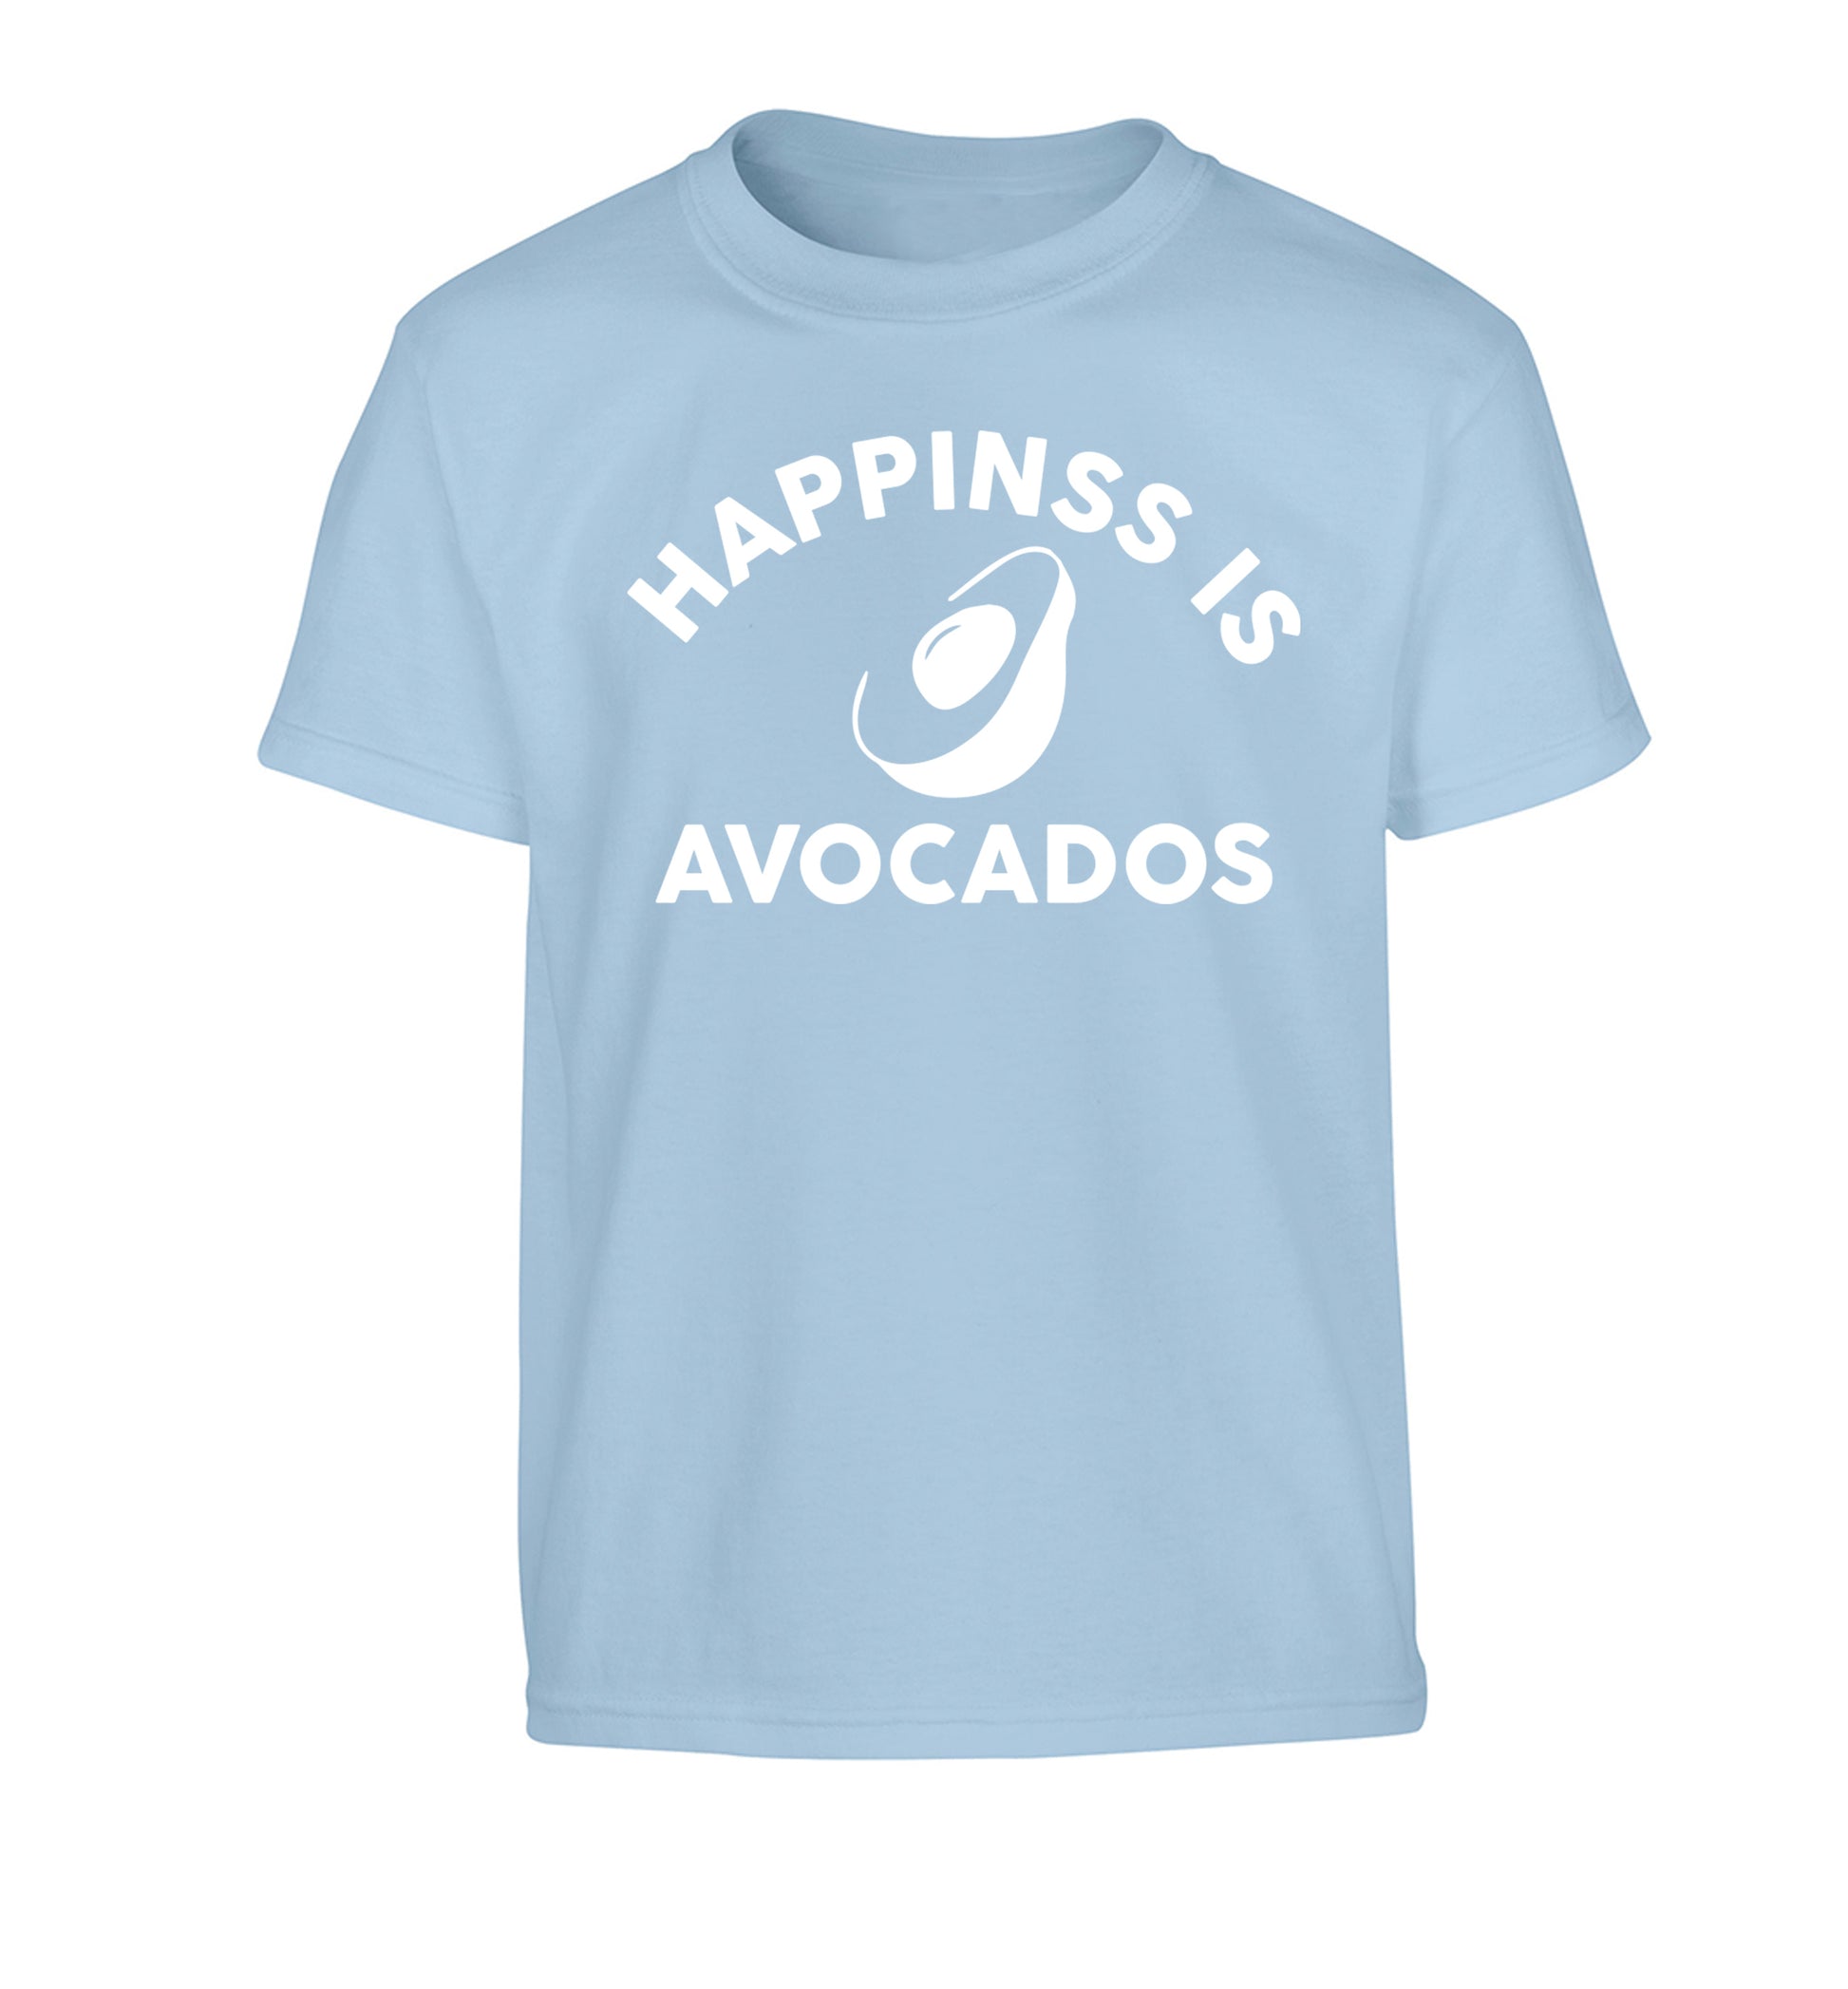 Happiness is avocados Children's light blue Tshirt 12-14 Years